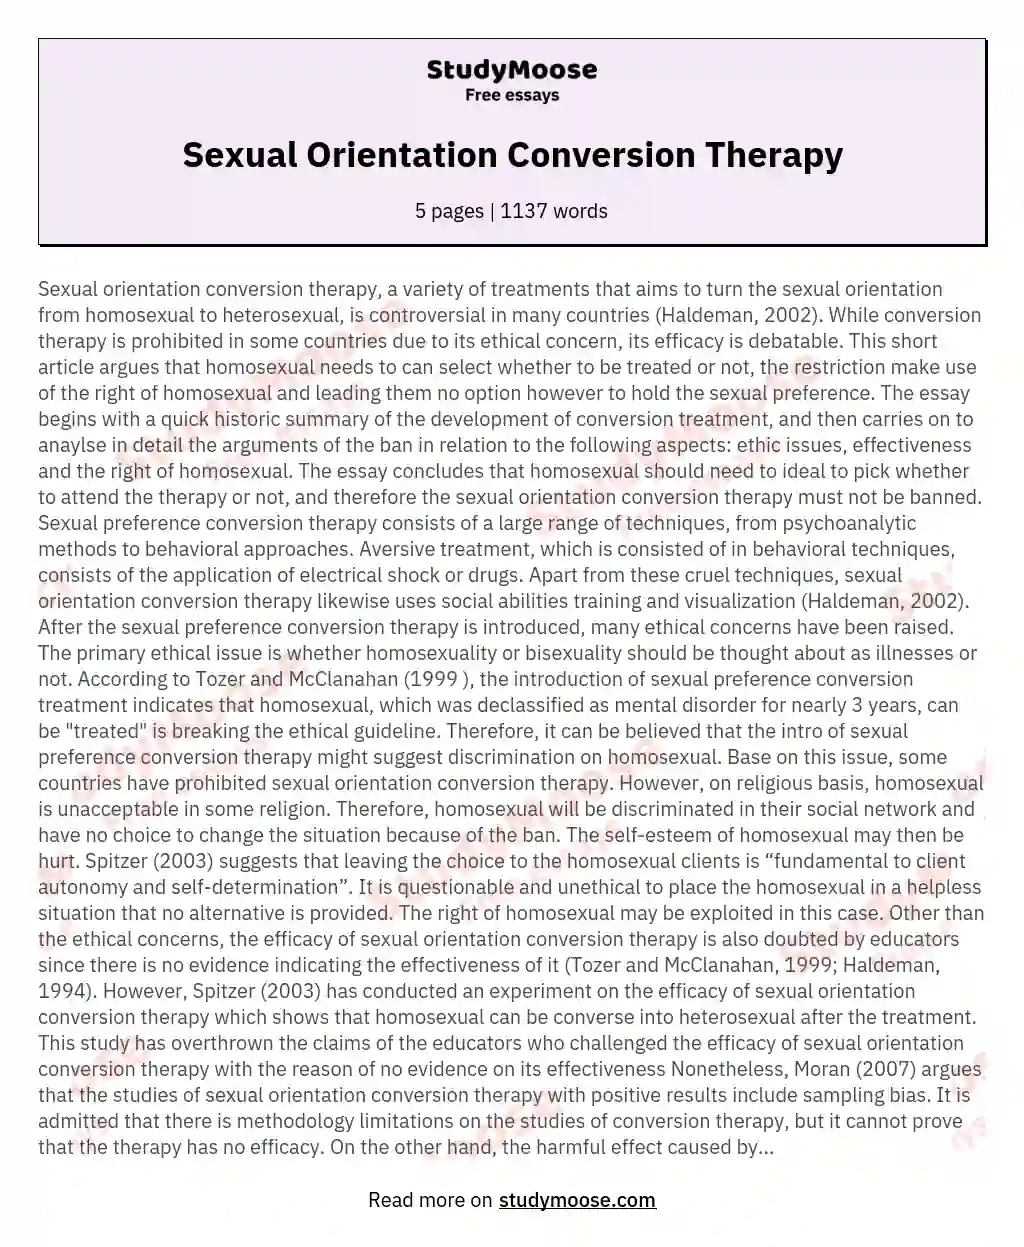 Sexual Orientation Conversion Therapy